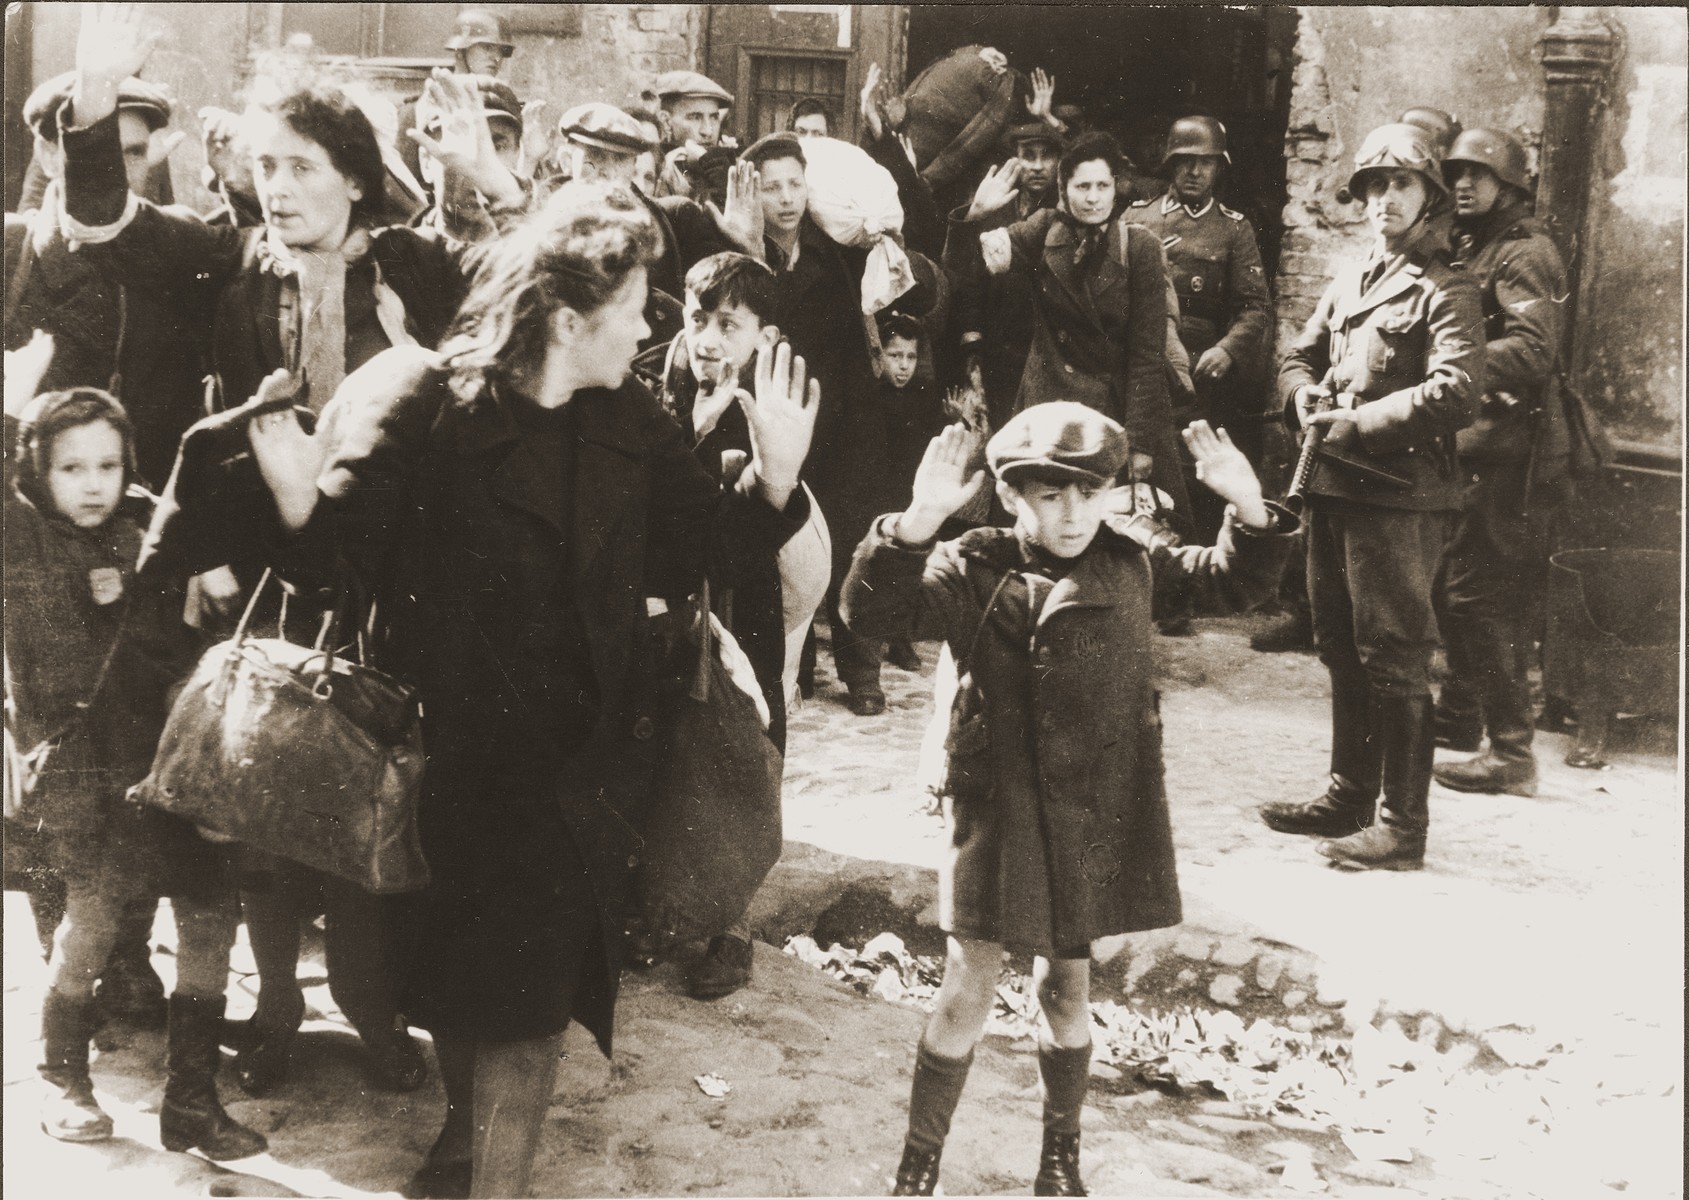 Jews captured by SS and SD troops during the suppression of the Warsaw ghetto uprising are forced to leave their shelter and march to the Umschlagplatz for deportation.  

The original German caption (translated to English) reads, "Pulled from the bunkers by force."

The SD trooper pictured second from the right, is SS-Rottenfuehrer Josef Bloesche, who was identified by authorities using this photograph.  Bloesche was tried for war crimes by an East German court in 1969, sentenced to death and executed in July of that year.  

The little girl on the left has been identified as Hanka Lamet, who is standing next to her mother, Matylda Lamet Goldfinger (the woman second from the left).  The boy carrying the sack has been identified as Leo Kartuzinsky and the woman in the front has been identified as Chana Zeilinwarger.  Numerous people have identified the boy in the foreground as either Arthur Domb Semiontek, Israel Rondel, Tsvi Nussbaum or Levi Zeilinwarger, but none of these identifications can be conclusively corroborated.

Original caption from donated photograph reads:  "The following pictures are copies of the book containing the report of the German commander who was responsible for cleaning out that ghetto in Warsaw, Poland.  This report, in the form of a leather bound book, was presented as evidence by the U.S. prosecution, Maj. Frank Walsh, at the international tribunal trials at Nurnberg, Germany."